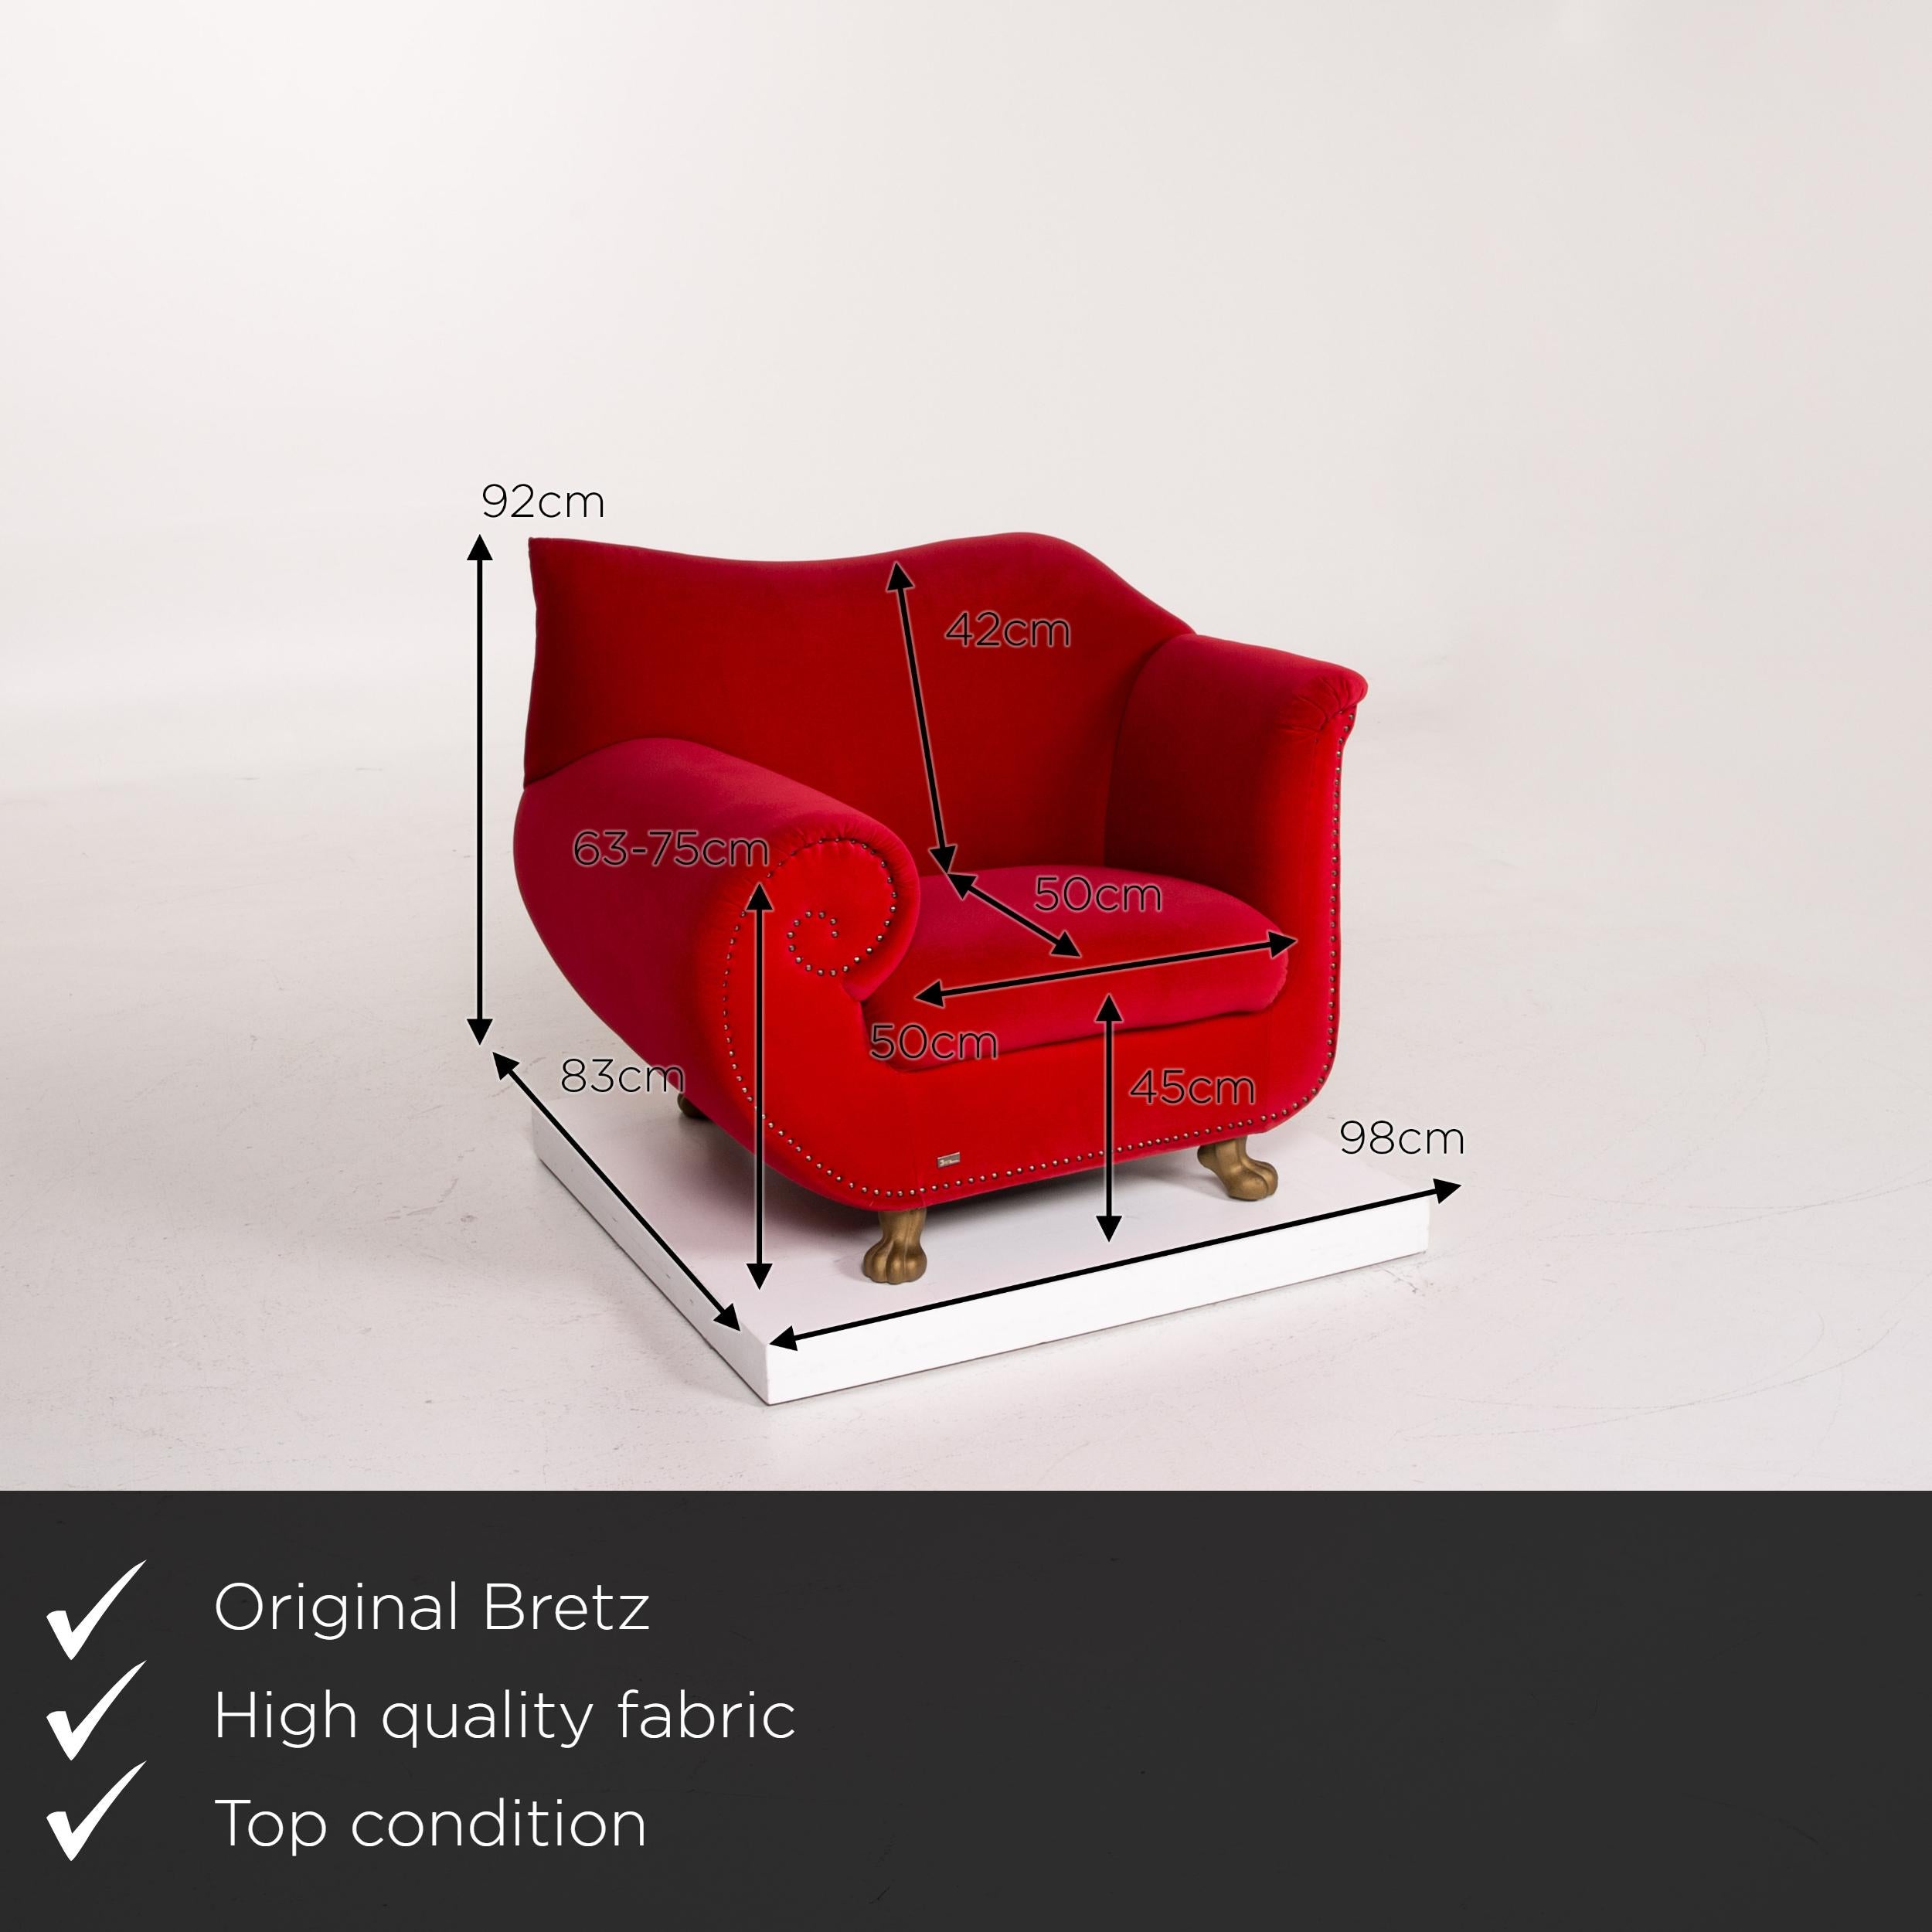 We present to you a Bretz Gaudi fabric armchair red.
 

 Product measurements in centimeters:
 

Depth 83
Width 98
Height 92
Seat height 45
Rest height 63
Seat depth 50
Seat width 50
Back height 42.
 